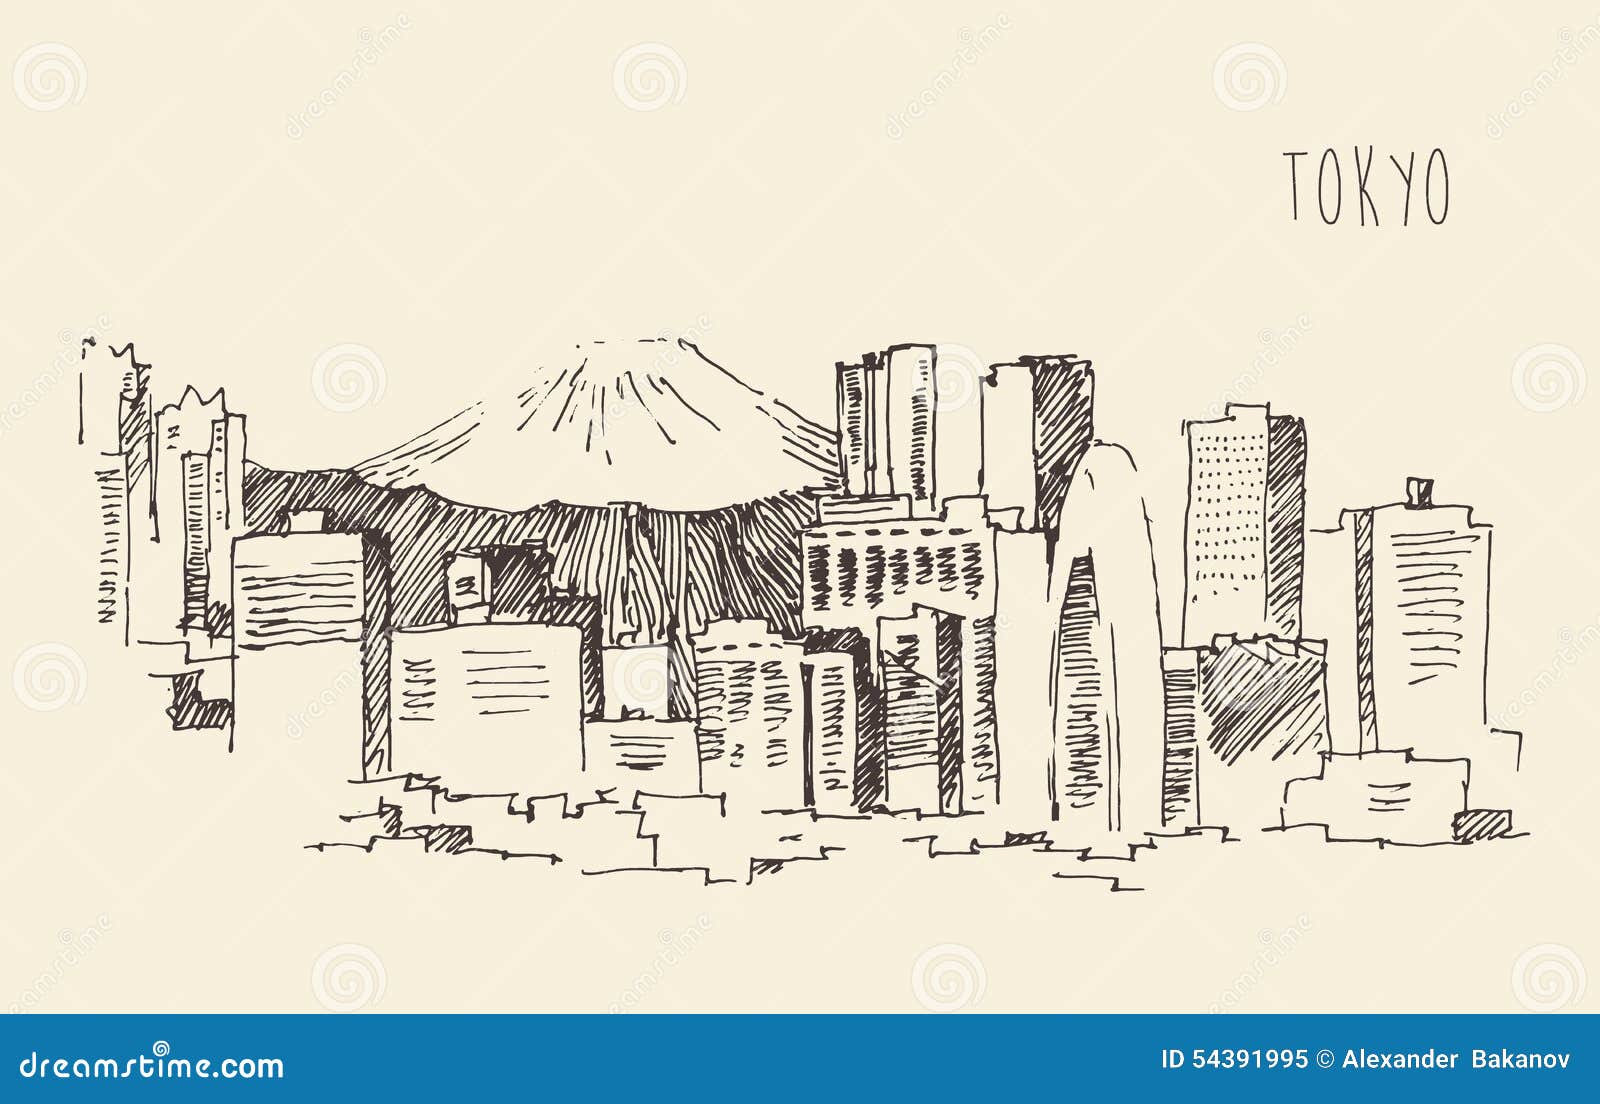 30+ Trends Ideas Easy Japan City Drawing